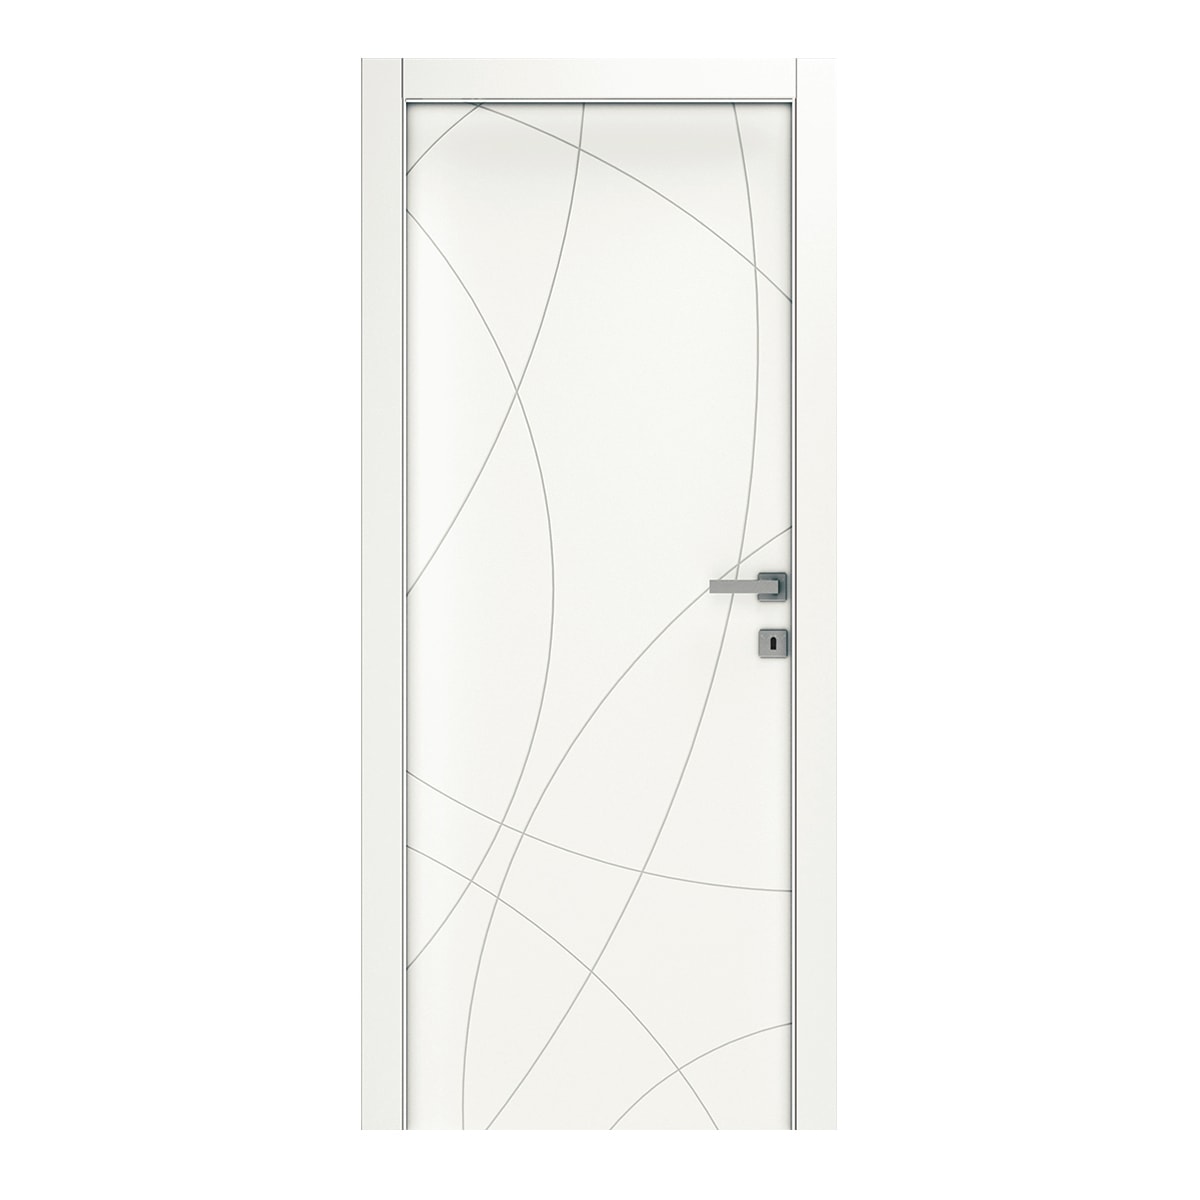 SIGN REV WHITE LACQUERED DOOR 80 X 210